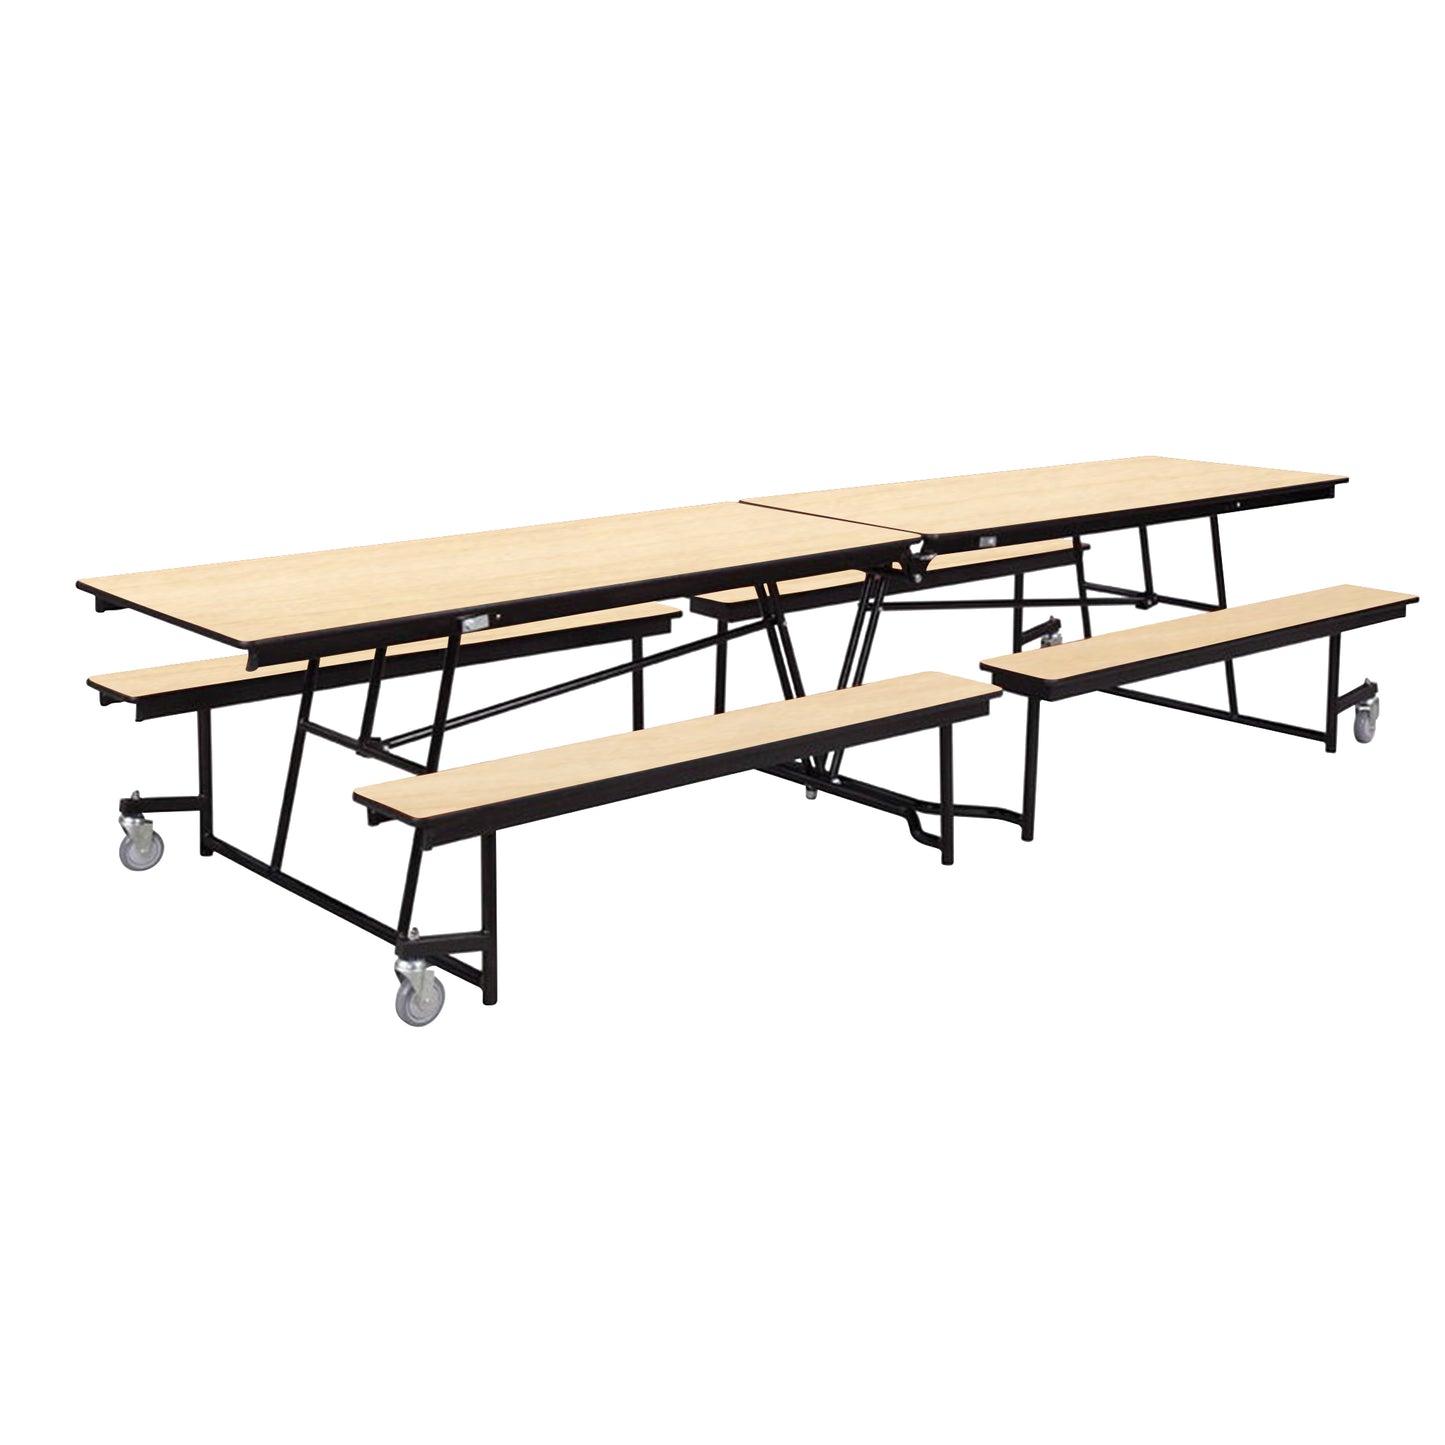 NPS Mobile Cafeteria Table - 30" W x 12' L - Seats 12-16 (National Public Seating NPS-MTFB12)